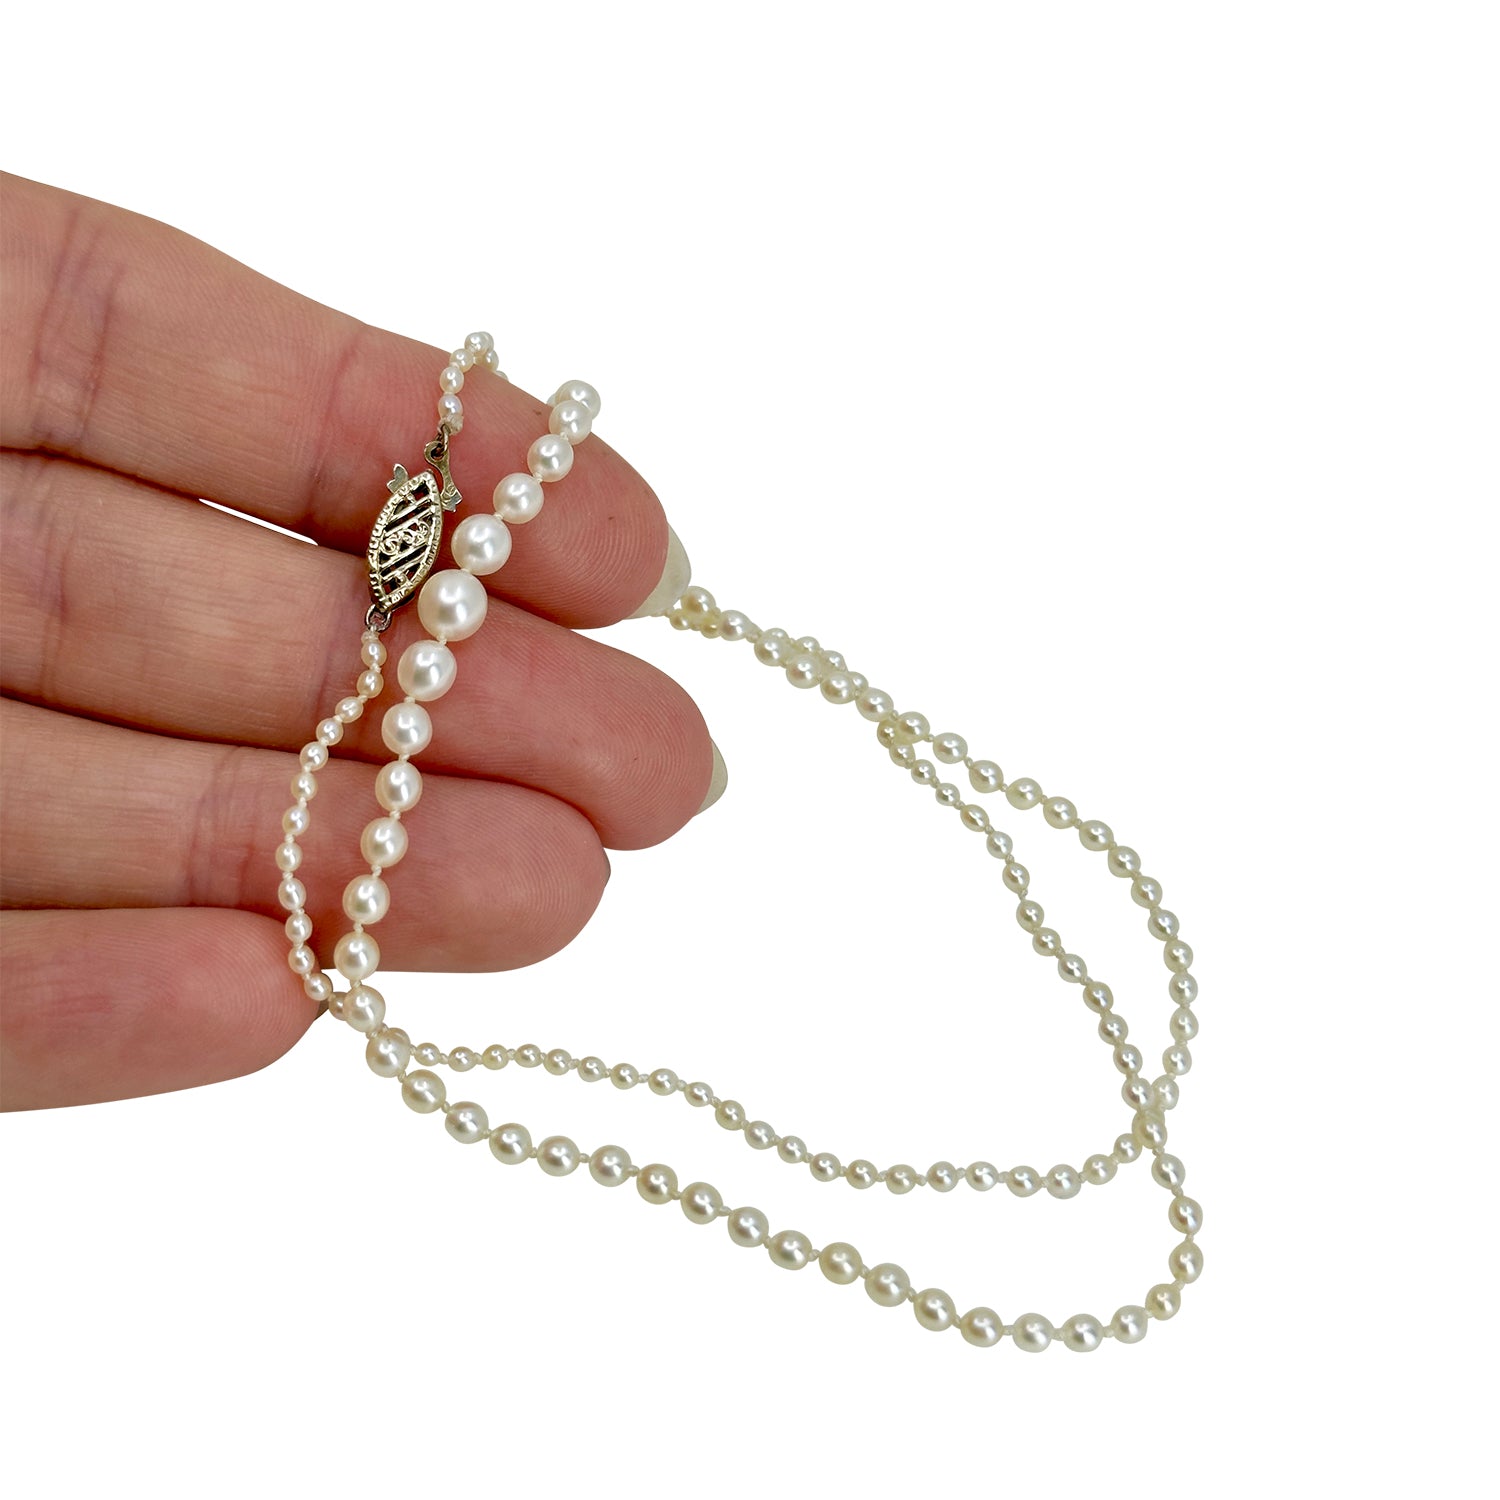 Antique Seed Pearl Japanese Saltwater Akoya Pearl Keshi Necklace- 14K White Gold 16.50 Inch